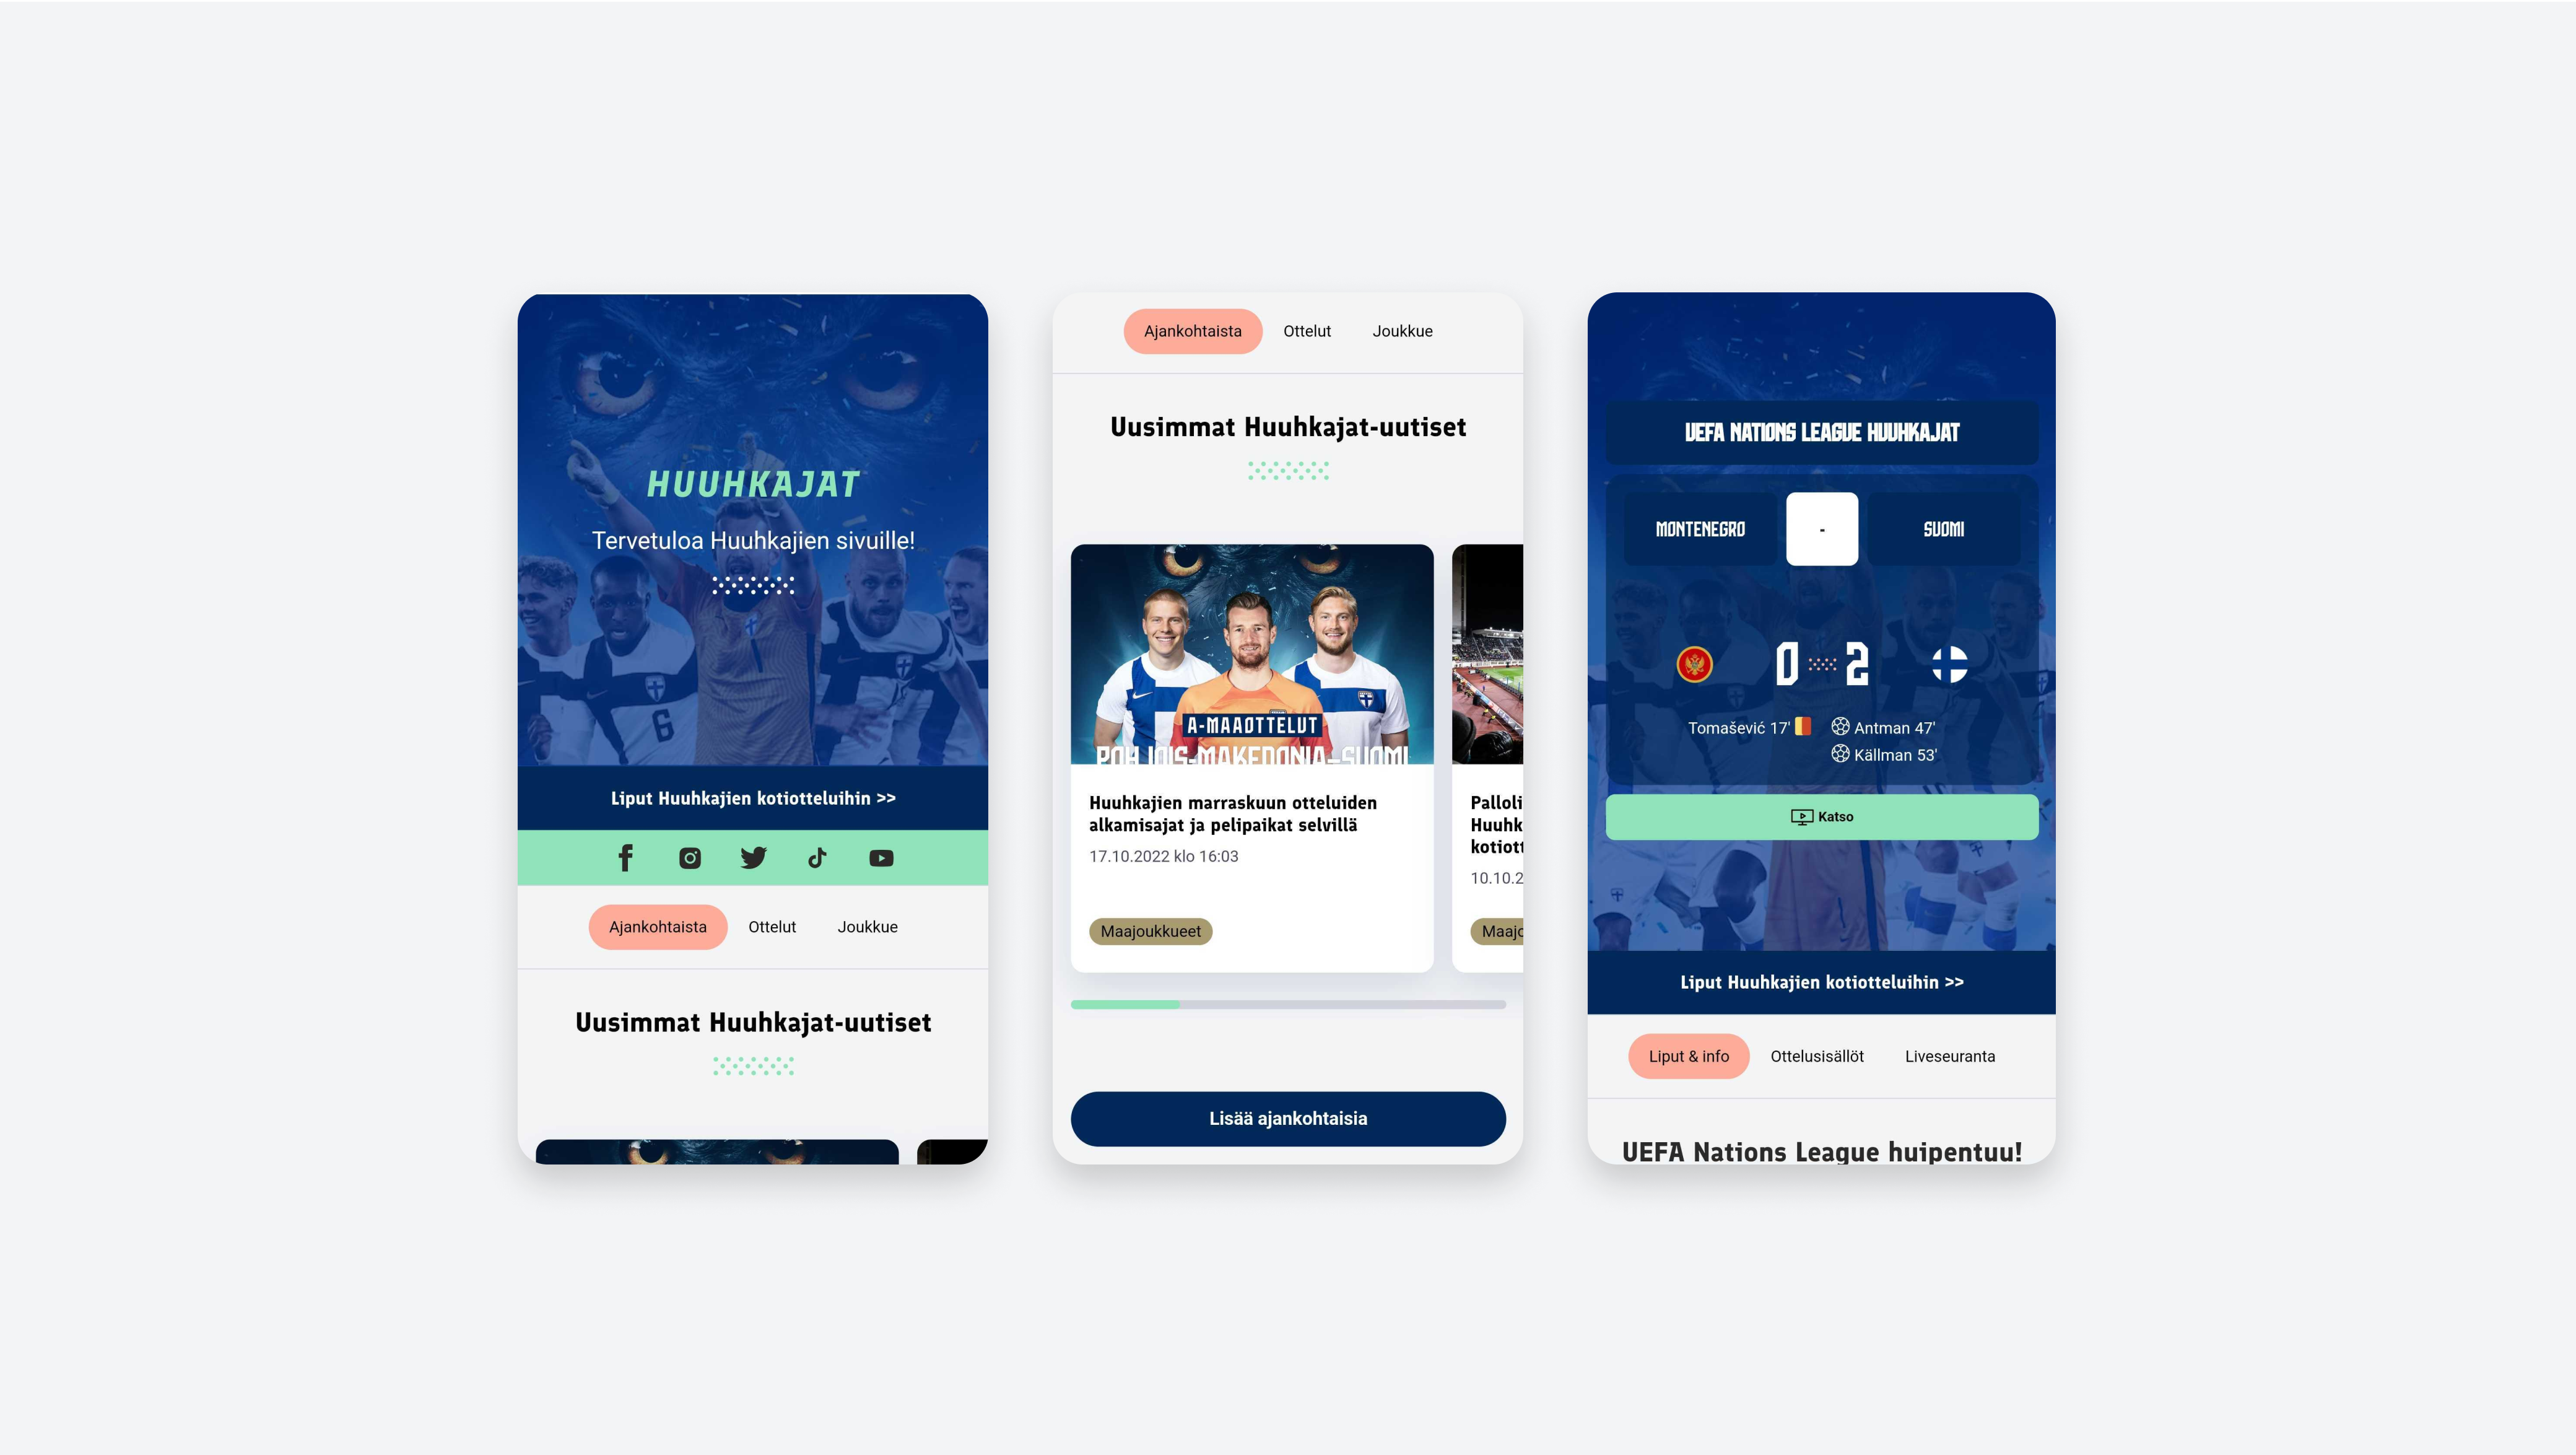 mobile phone mockups of Palloliitto website